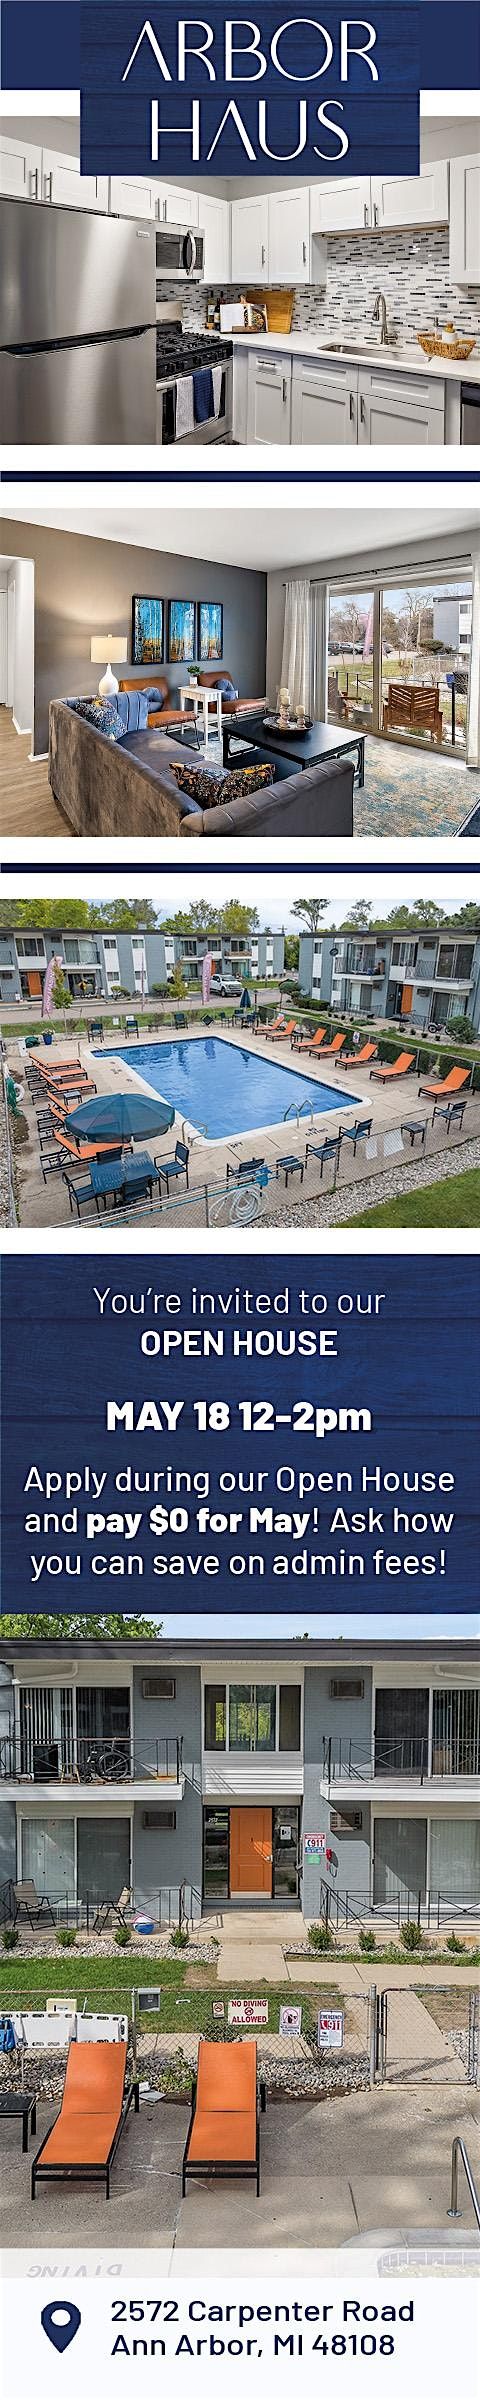 Open House at Arbor Haus Apartments